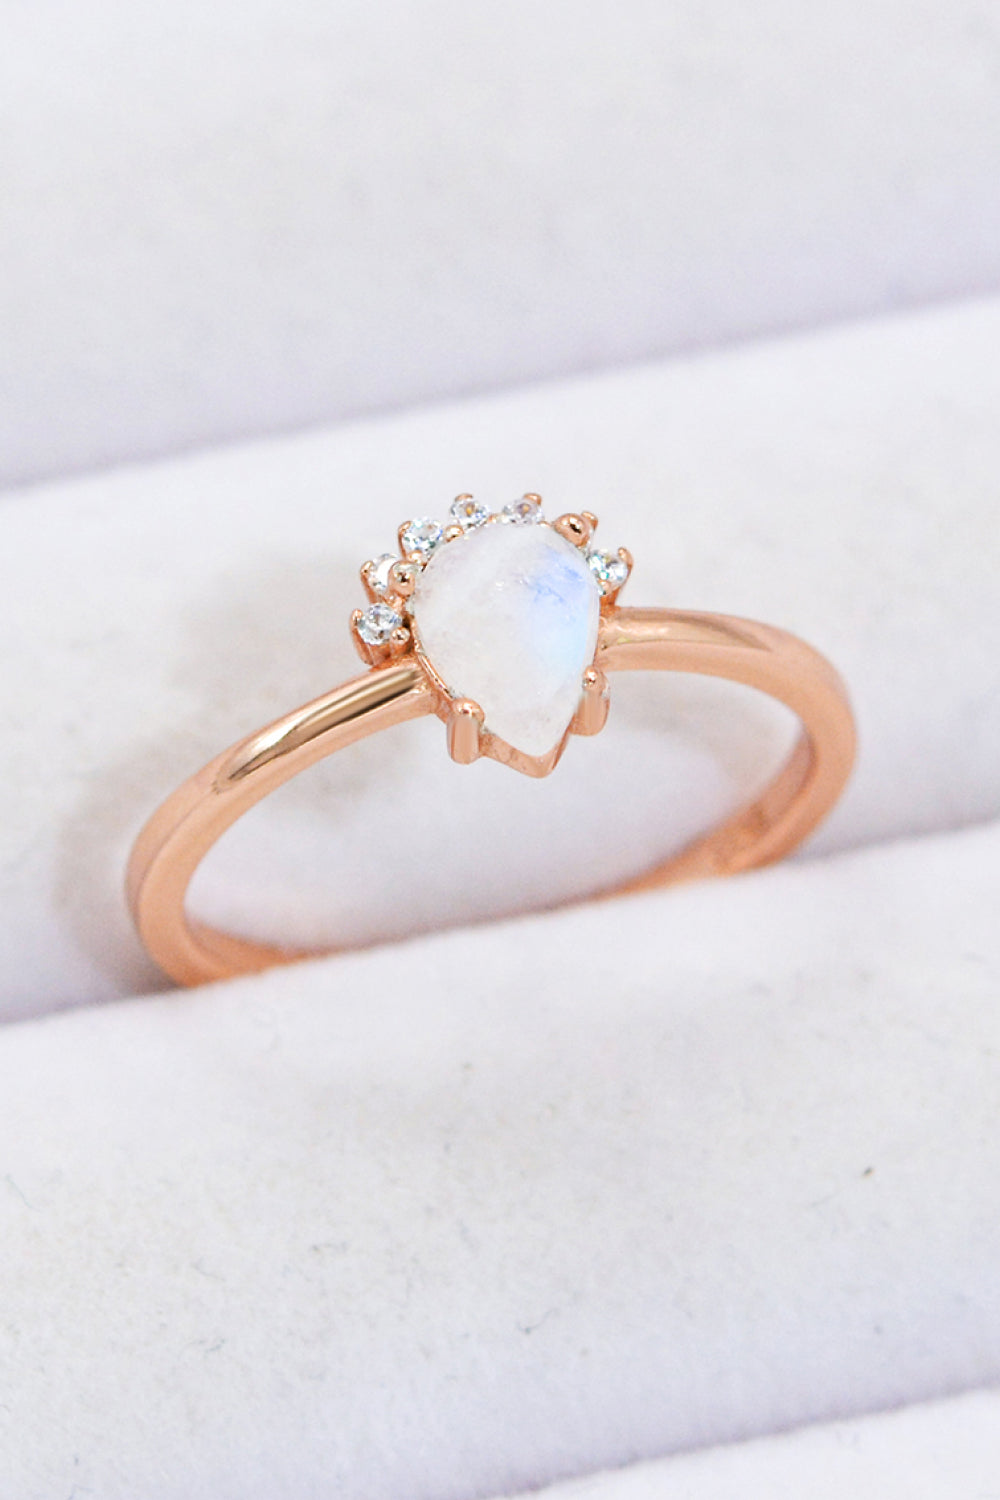 18K Rose Gold-Plated Pear Shape Natural Moonstone Ring - Tophatter Shopping Deals